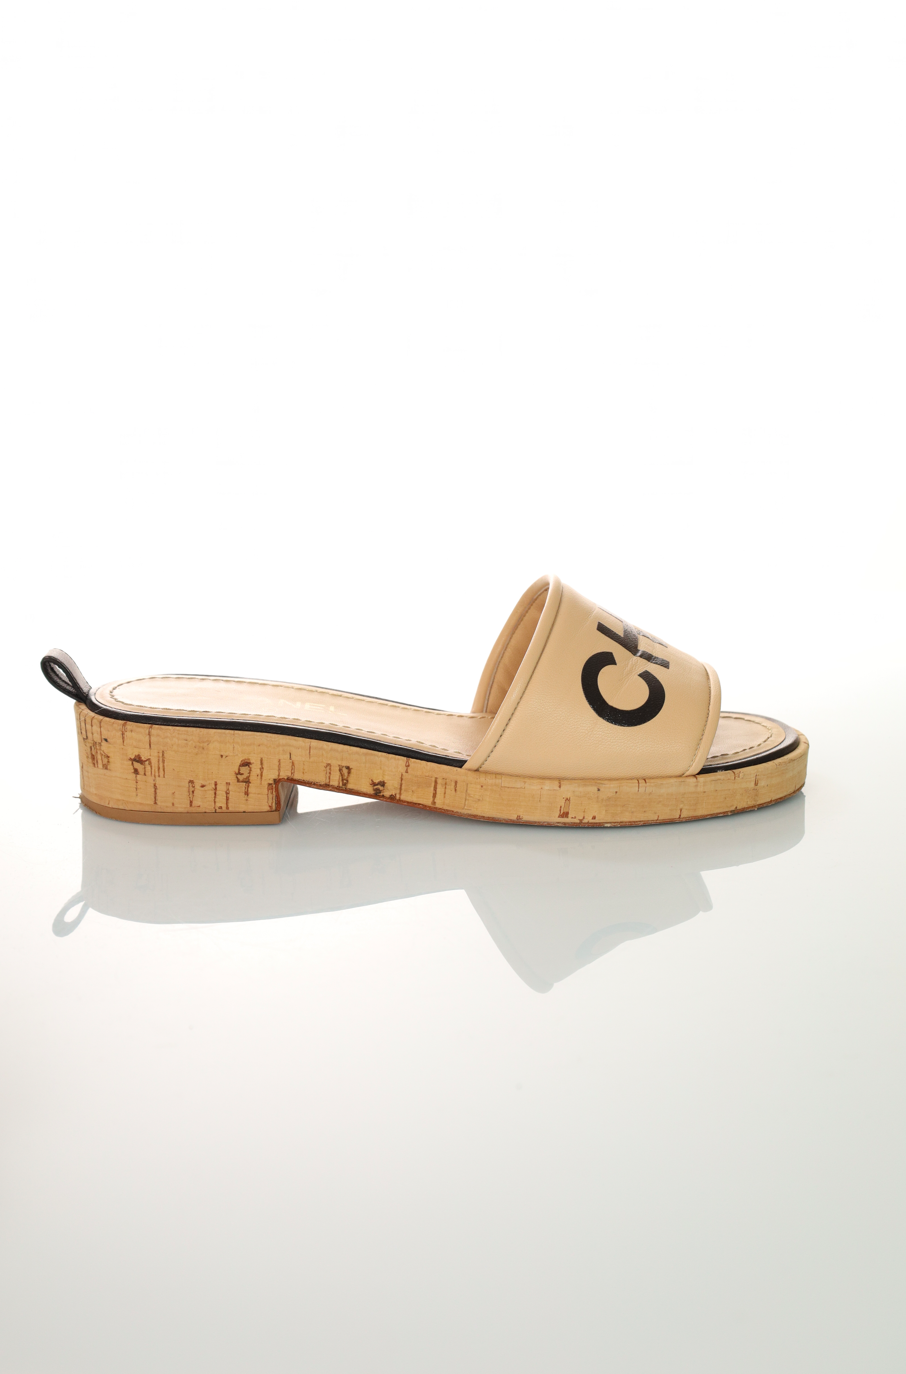 CHANEL MULES size. 40.5 CHA NEL Sandals G34876 Mules